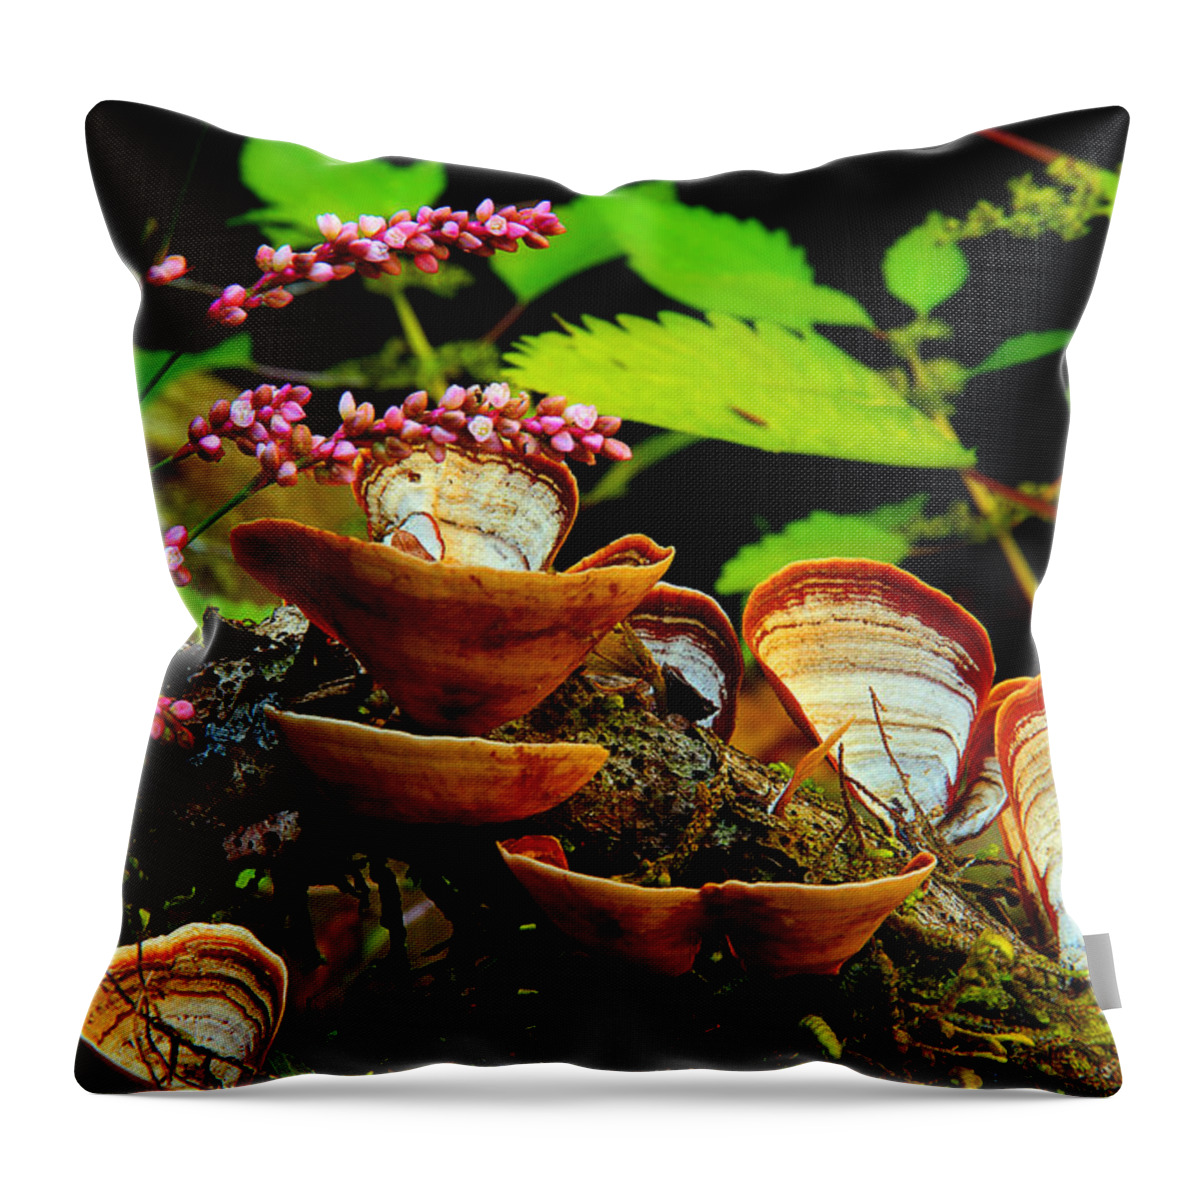 Flowers And Fungus Throw Pillow featuring the photograph Fungus Along The Stream by Mike Eingle